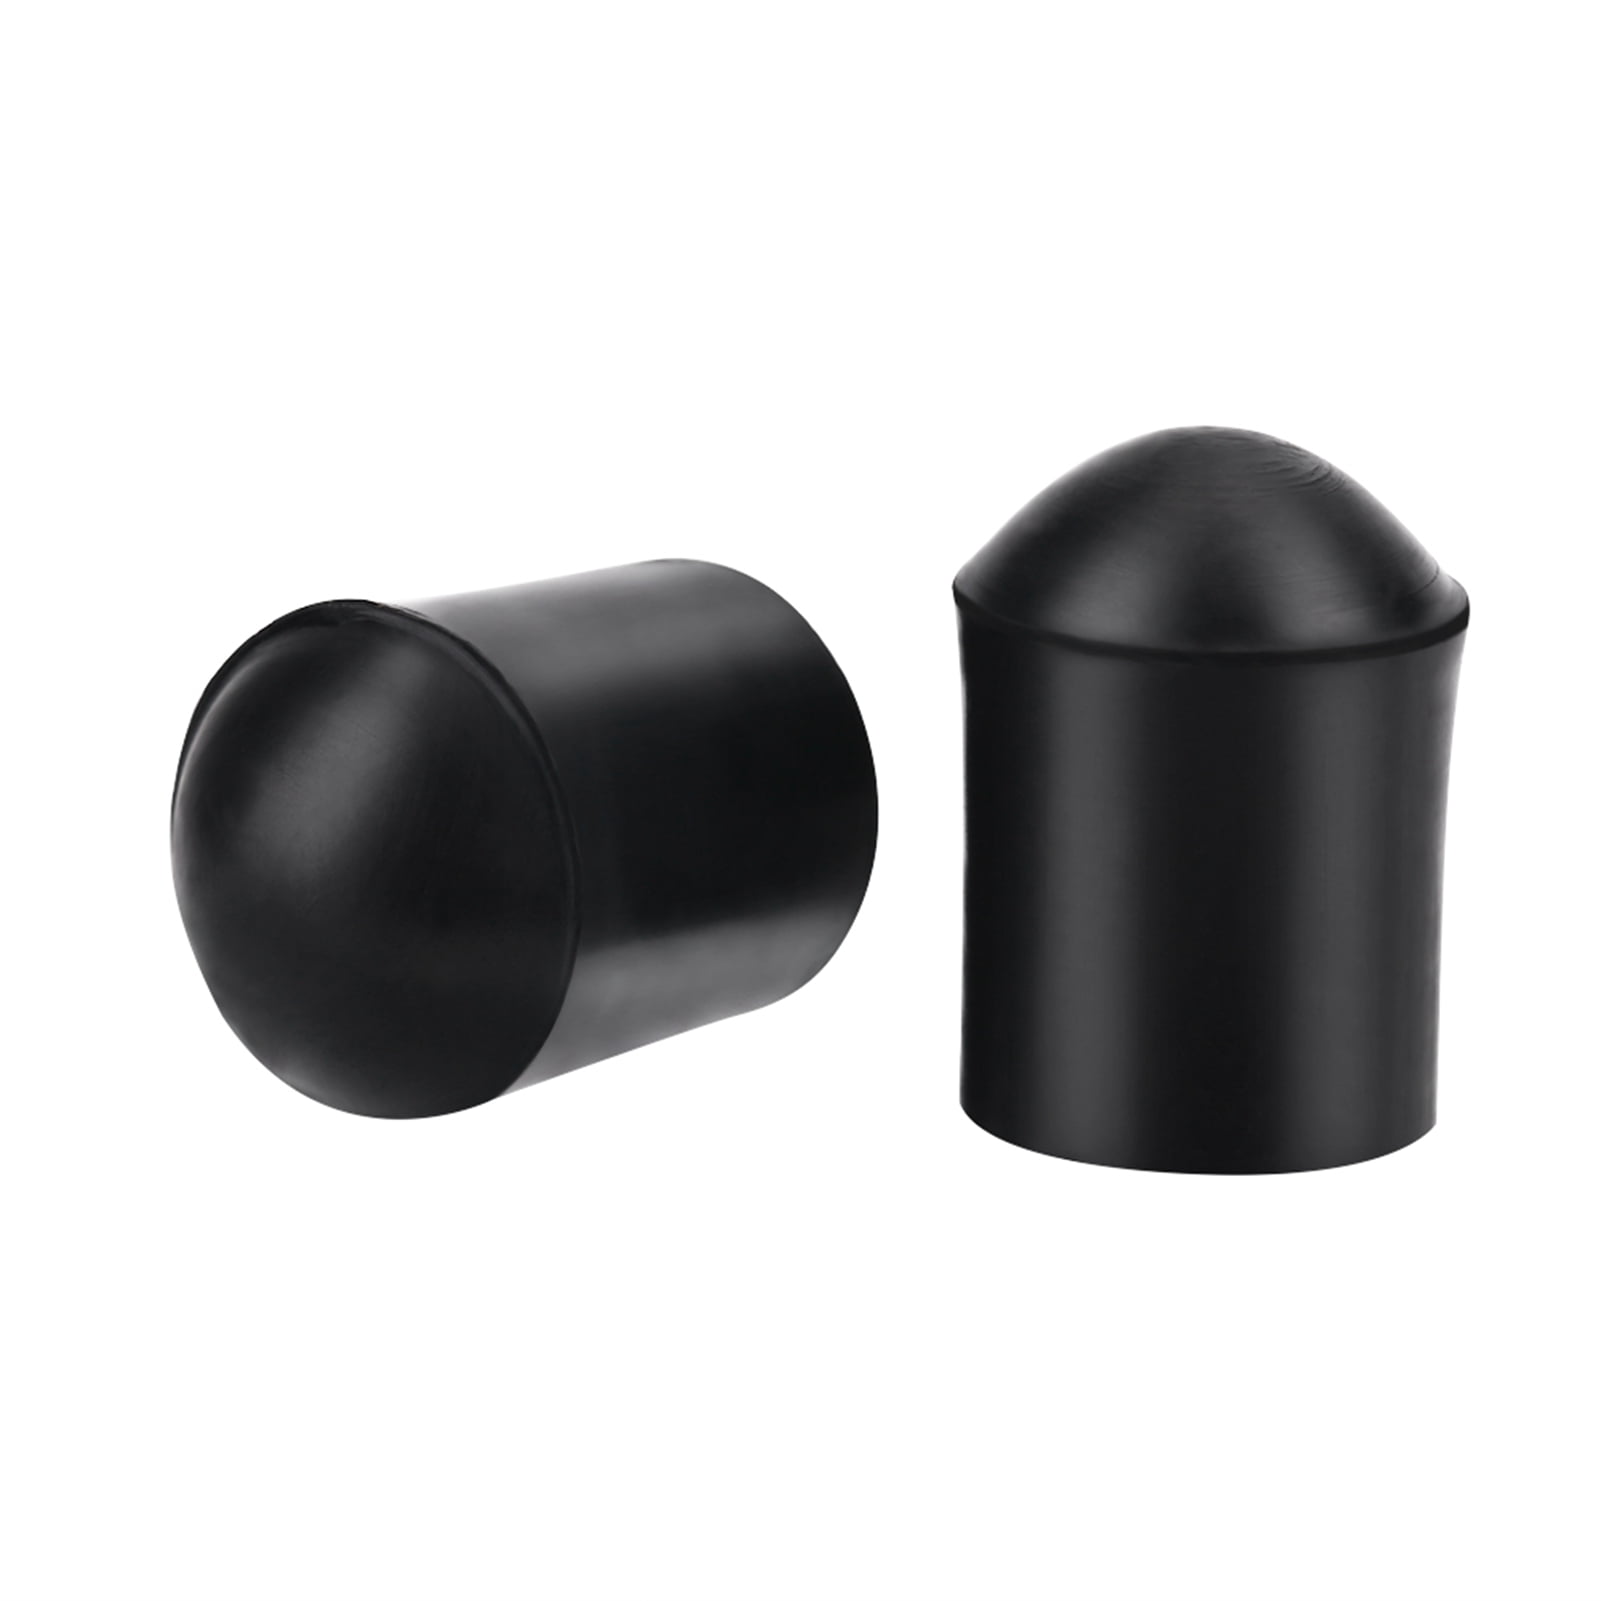 2pcs/set Rubber Feet Tips Black for Upright Double Bass Endpin Accessories Black 